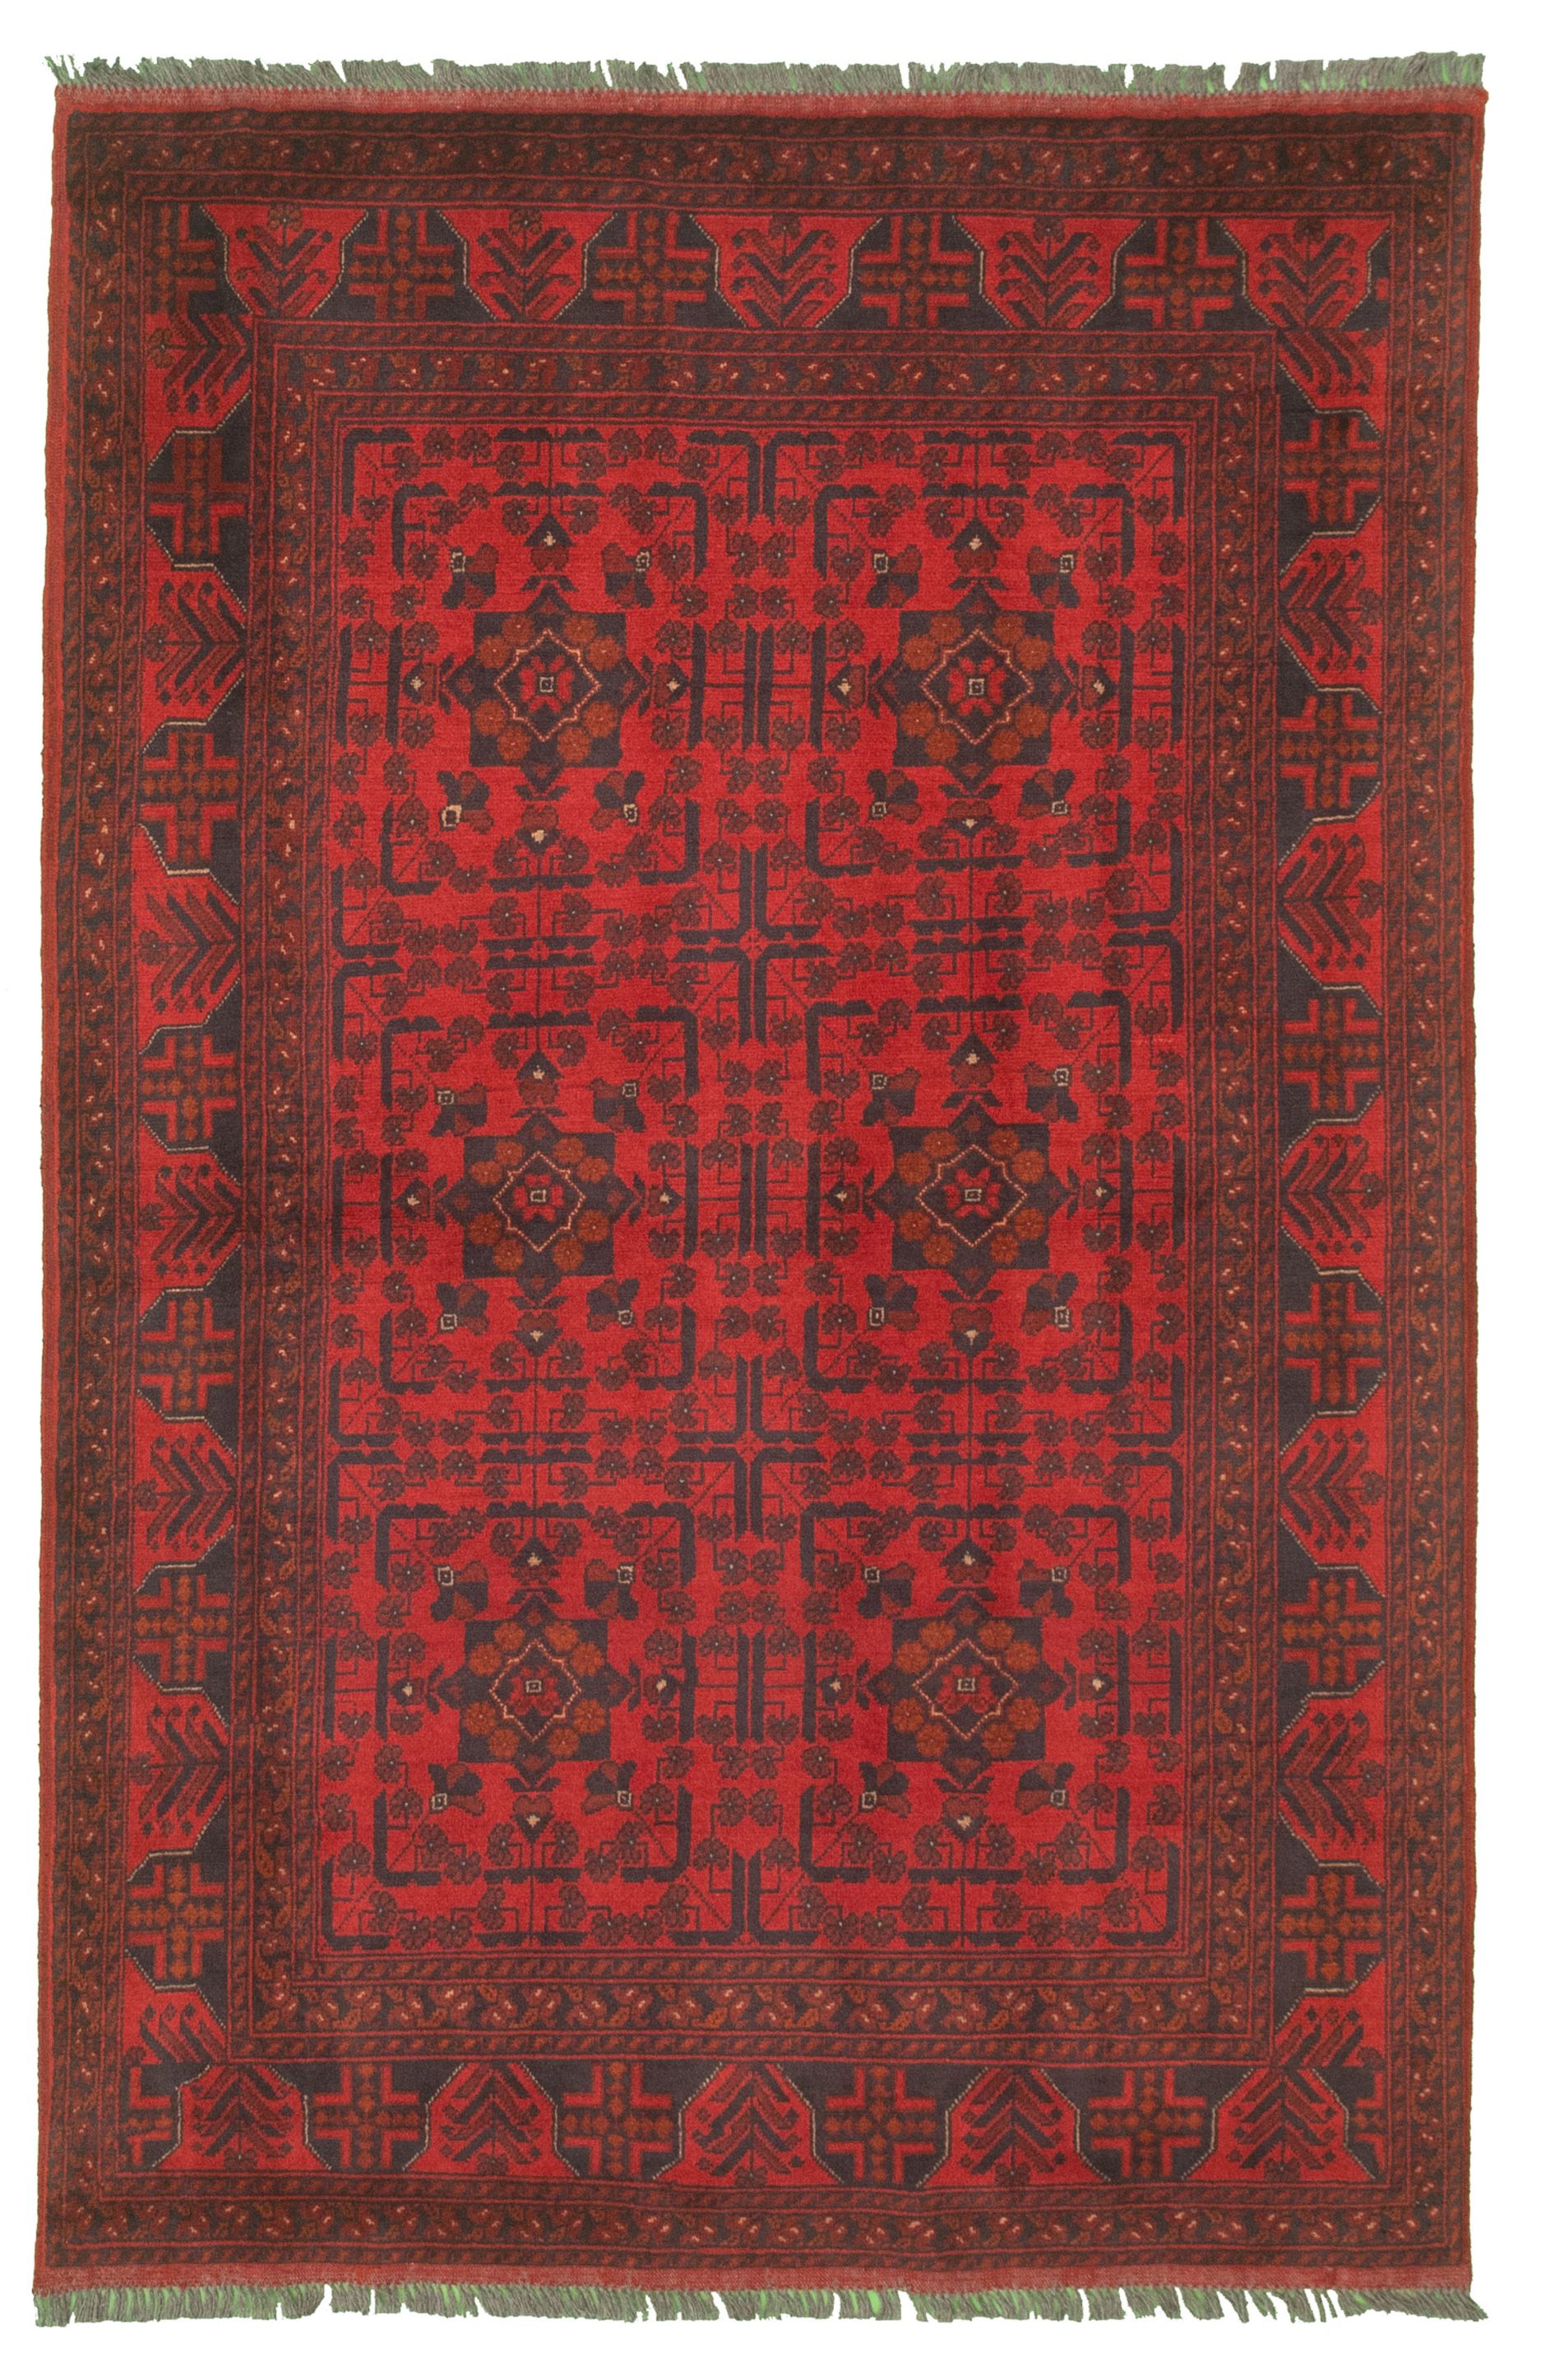 Hand-knotted Finest Khal Mohammadi Red Wool Rug 4'2" x 6'4" (16) Size: 4'2" x 6'4"  